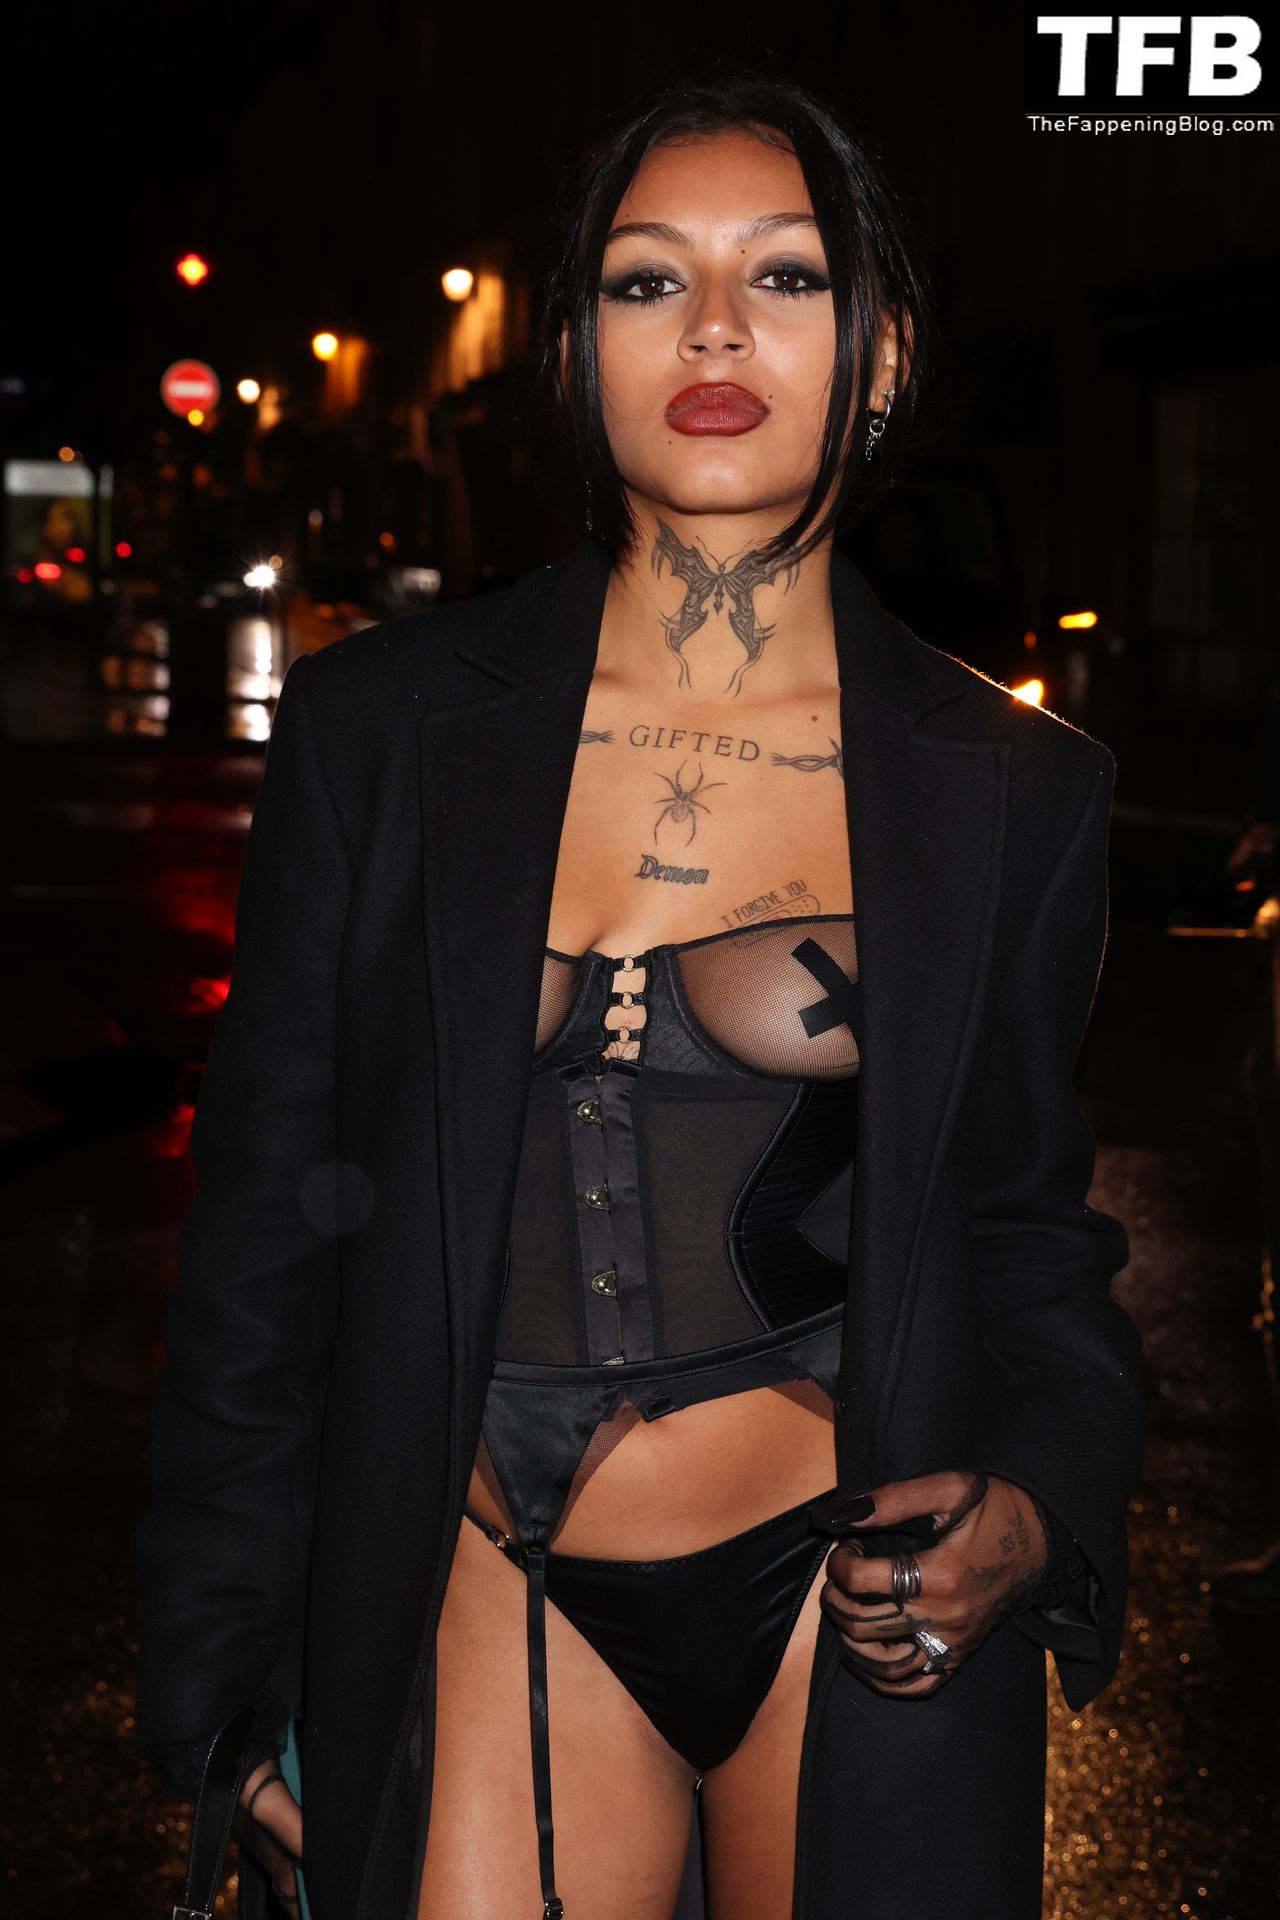 Ogee Flaunts Her Tits with Pasties While Leaving Etam Show in Paris (14 Photos)